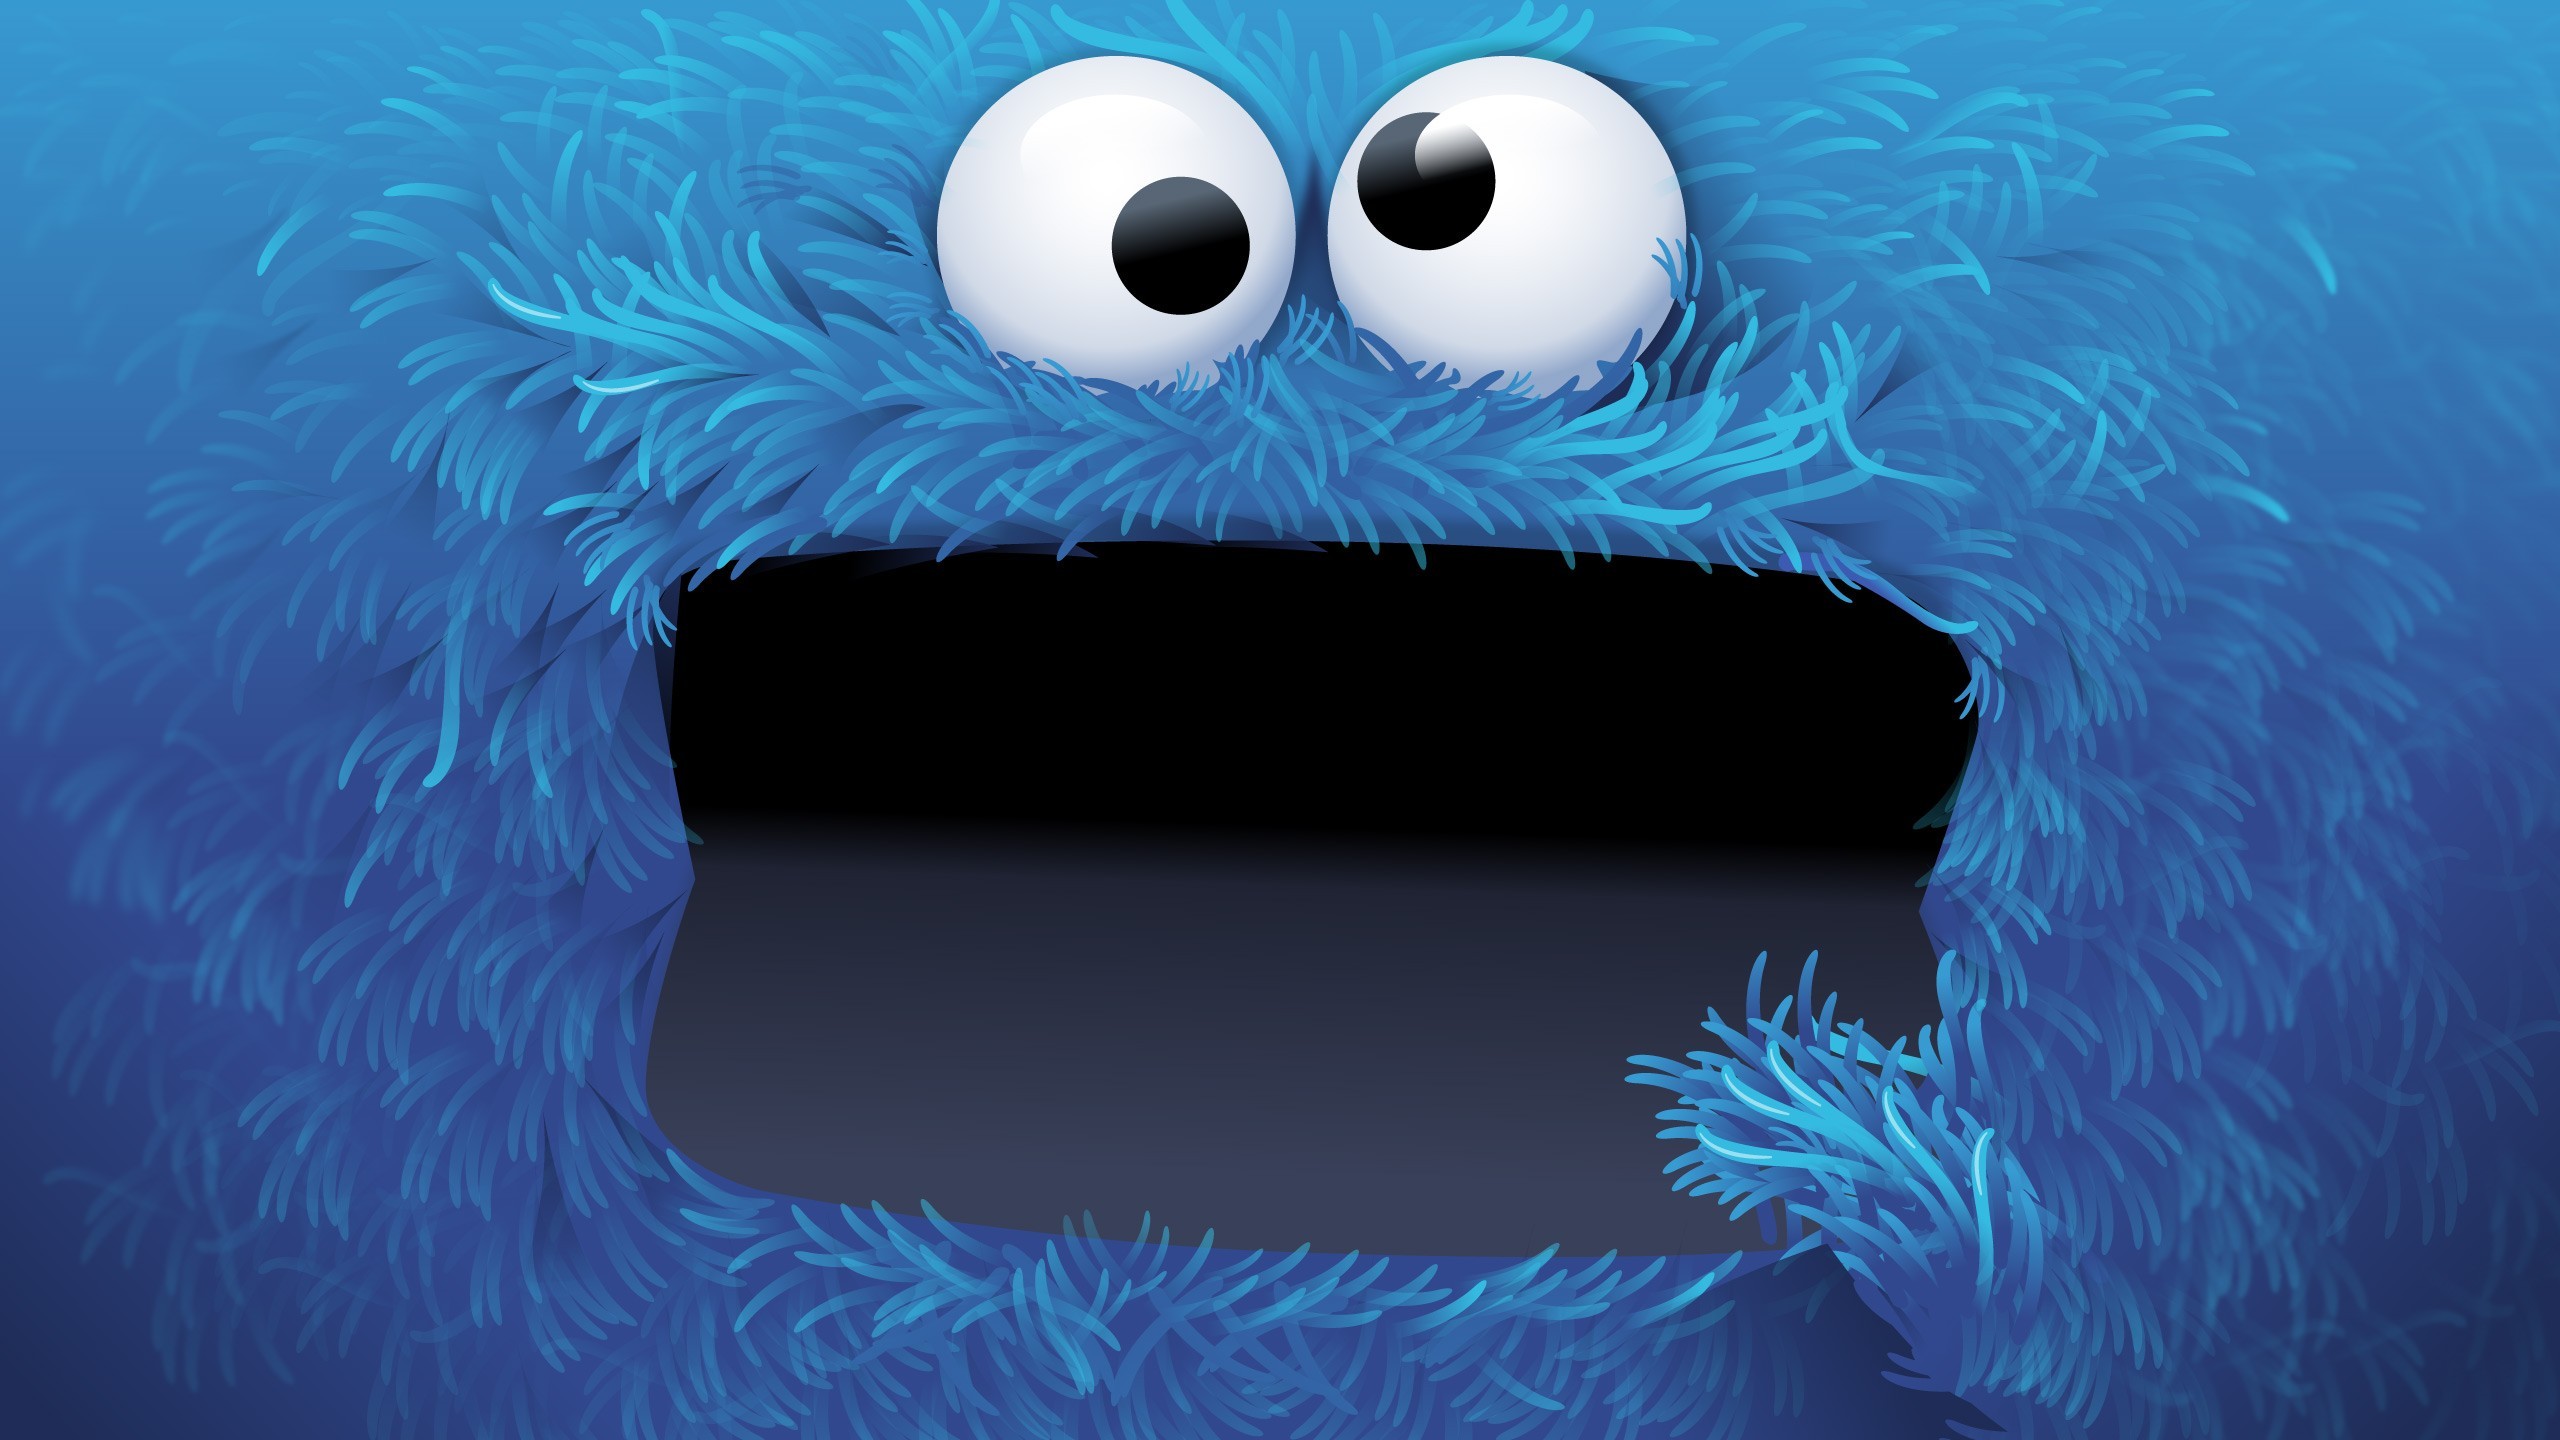 2560x1440 Monster HD Wallpapers Backgrounds Wallpaper | HD Wallpapers | Pinterest |  Cookie monster, Hd wallpaper and Monsters